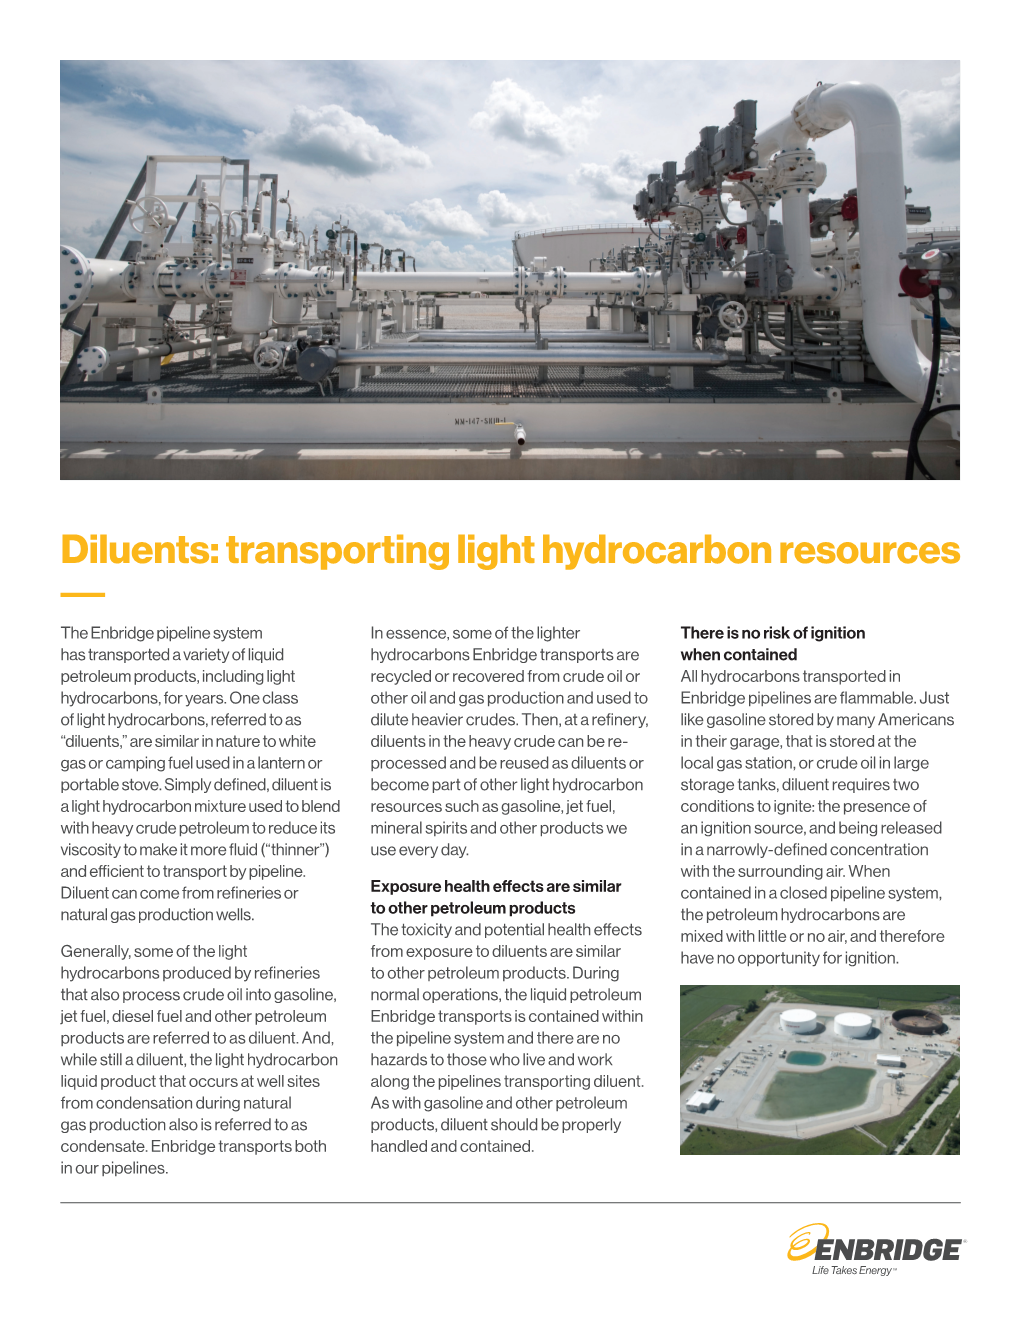 Diluents: Transporting Light Hydrocarbon Resources